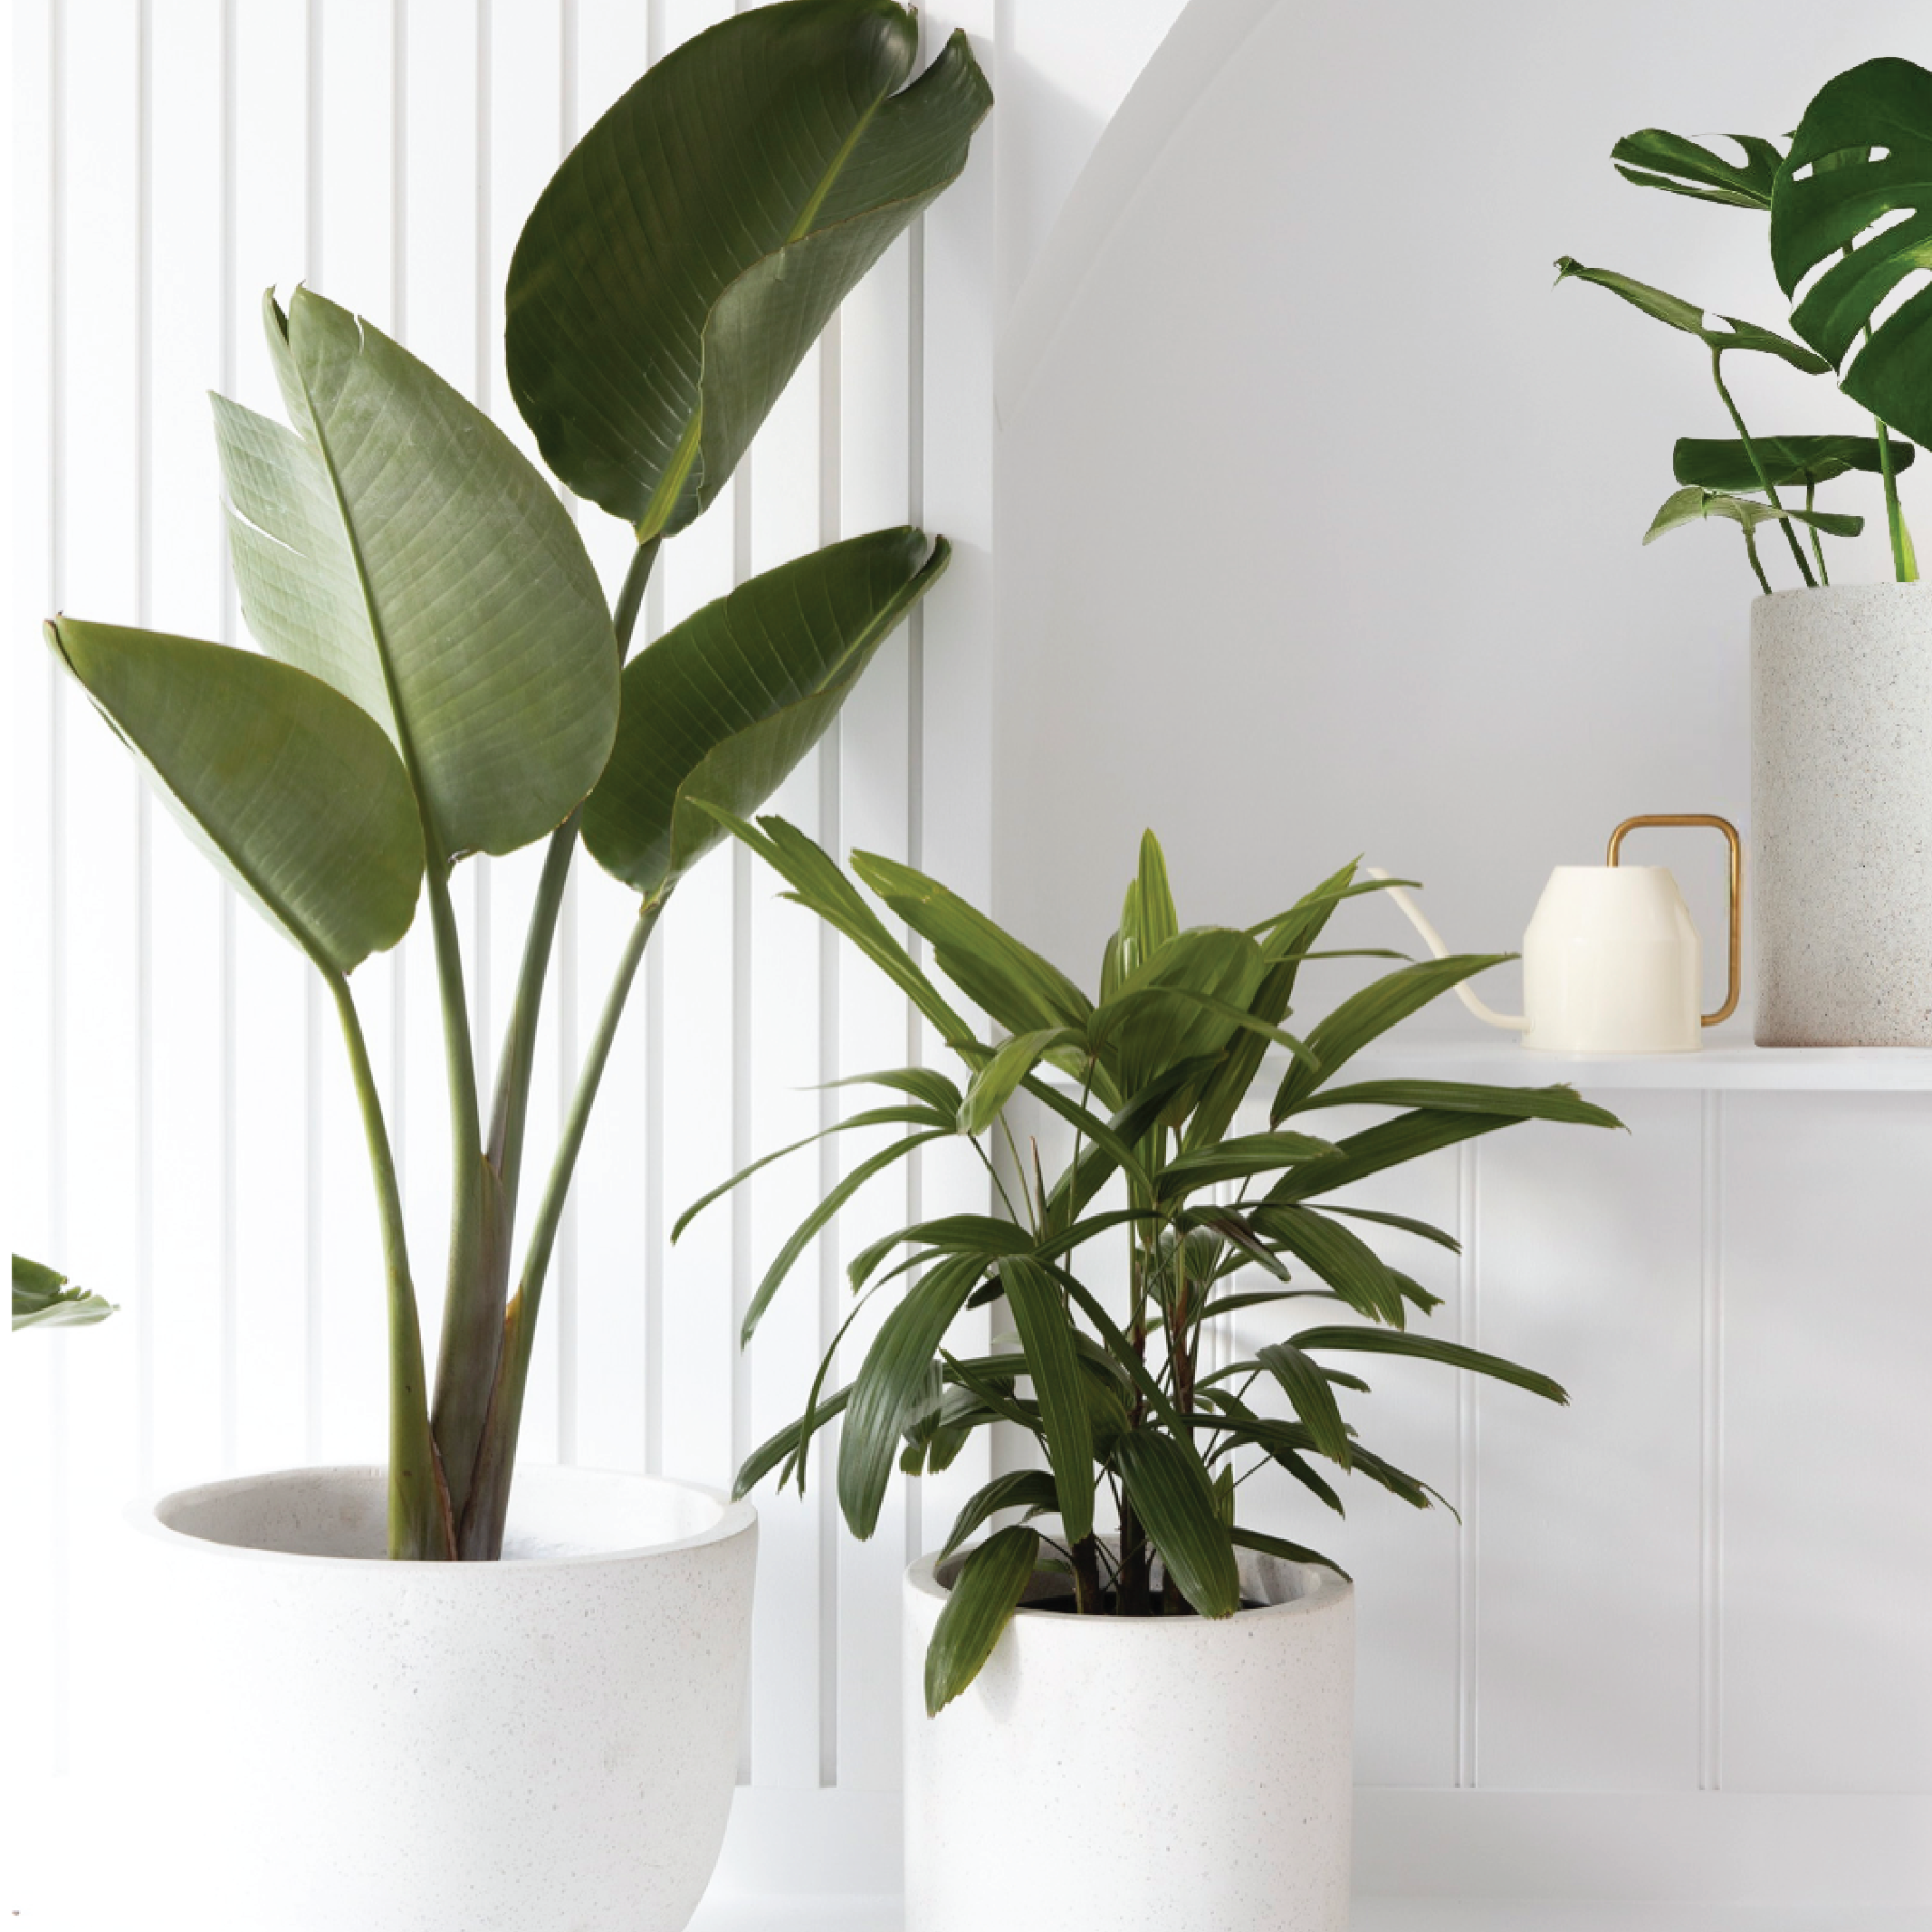 Collection of Indoor Plants for Living Rooms with beautiful White Pots from The Good Plant Co